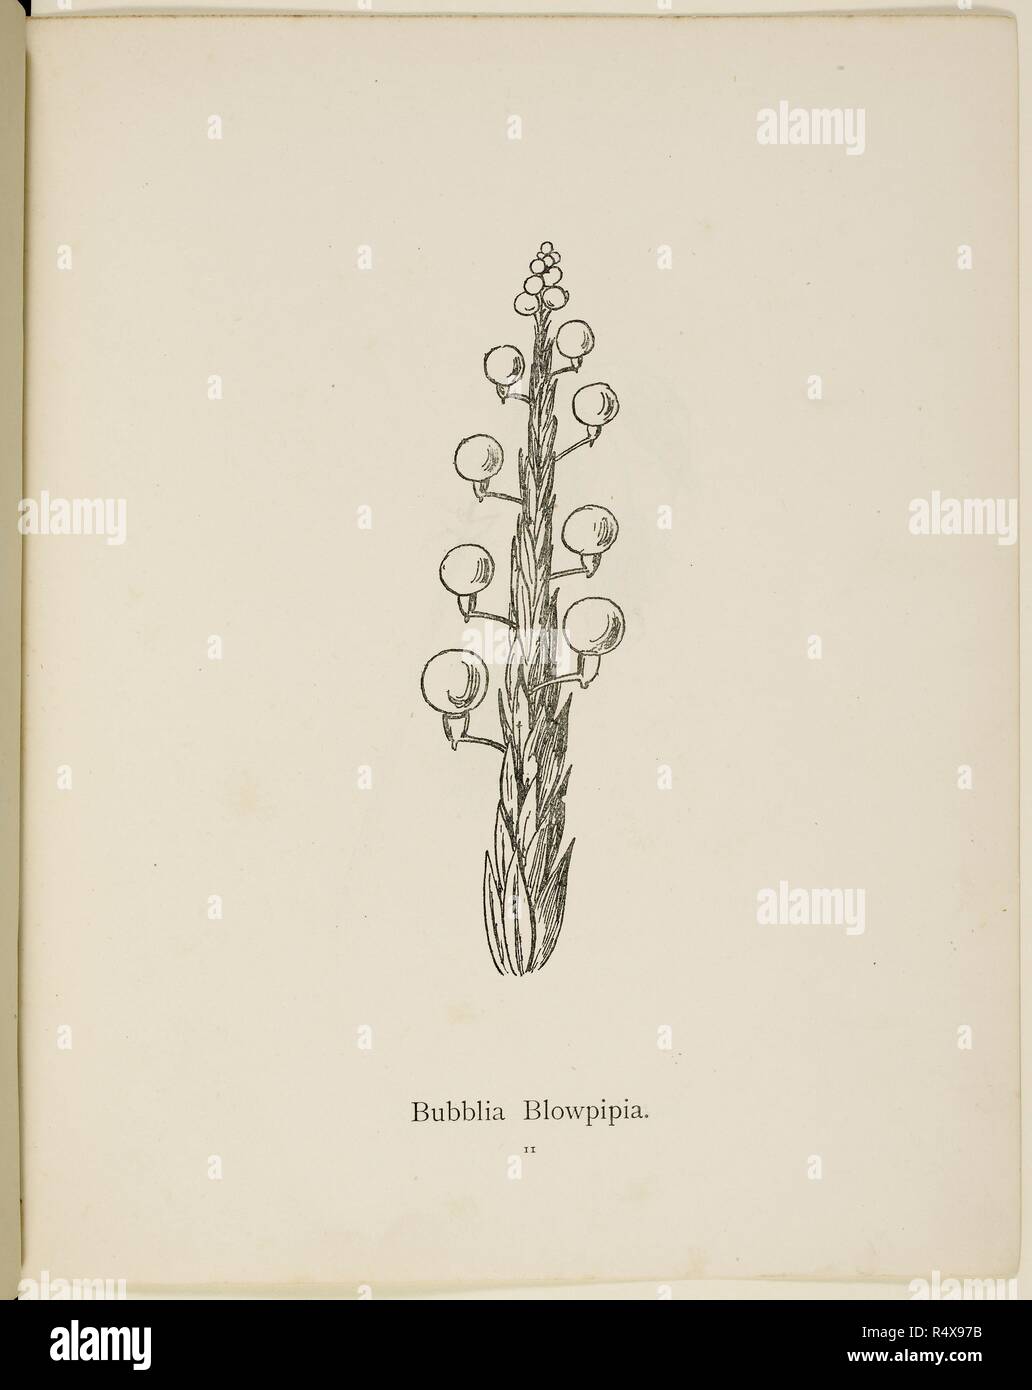 Fictional plant: 'Bubblia Blowpipia'  Illustration from Nonsense Botany by Edward Lear, published in 1889. . Nonsense Botany, and Nonsense Alphabets, Fifth edition. Frederick Warne & Co.: London & New York, 1889. Source: Cup.400.a.42 11. Language: English. Stock Photo